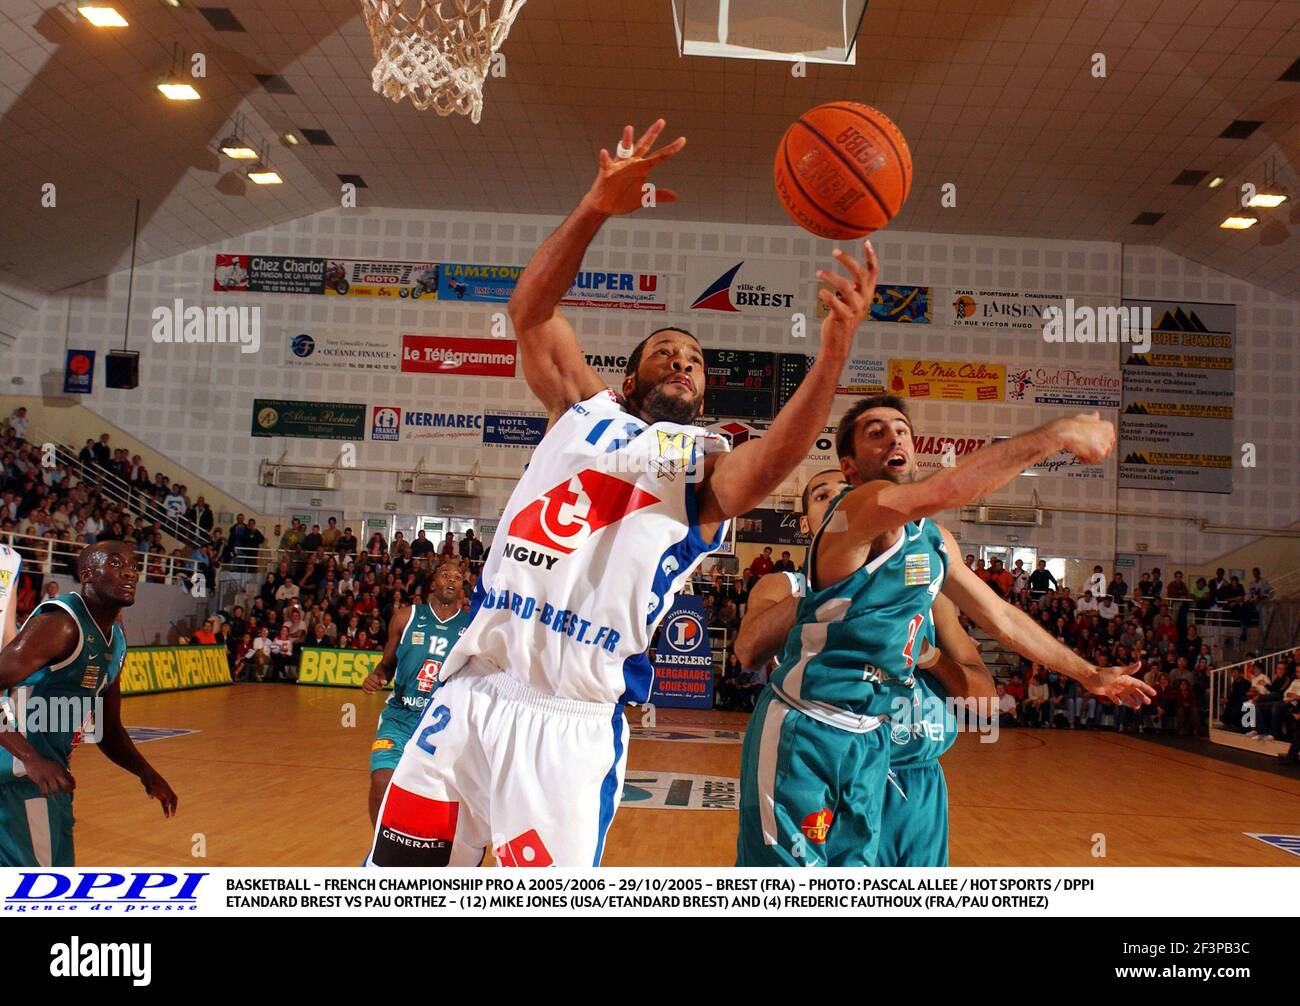 BASKETBALL - FRENCH CHAMPIONSHIP PRO A 2005/2006 - 29/10/2005 - BREST (FRA)  - PHOTO : PASCAL ALLEE / HOT